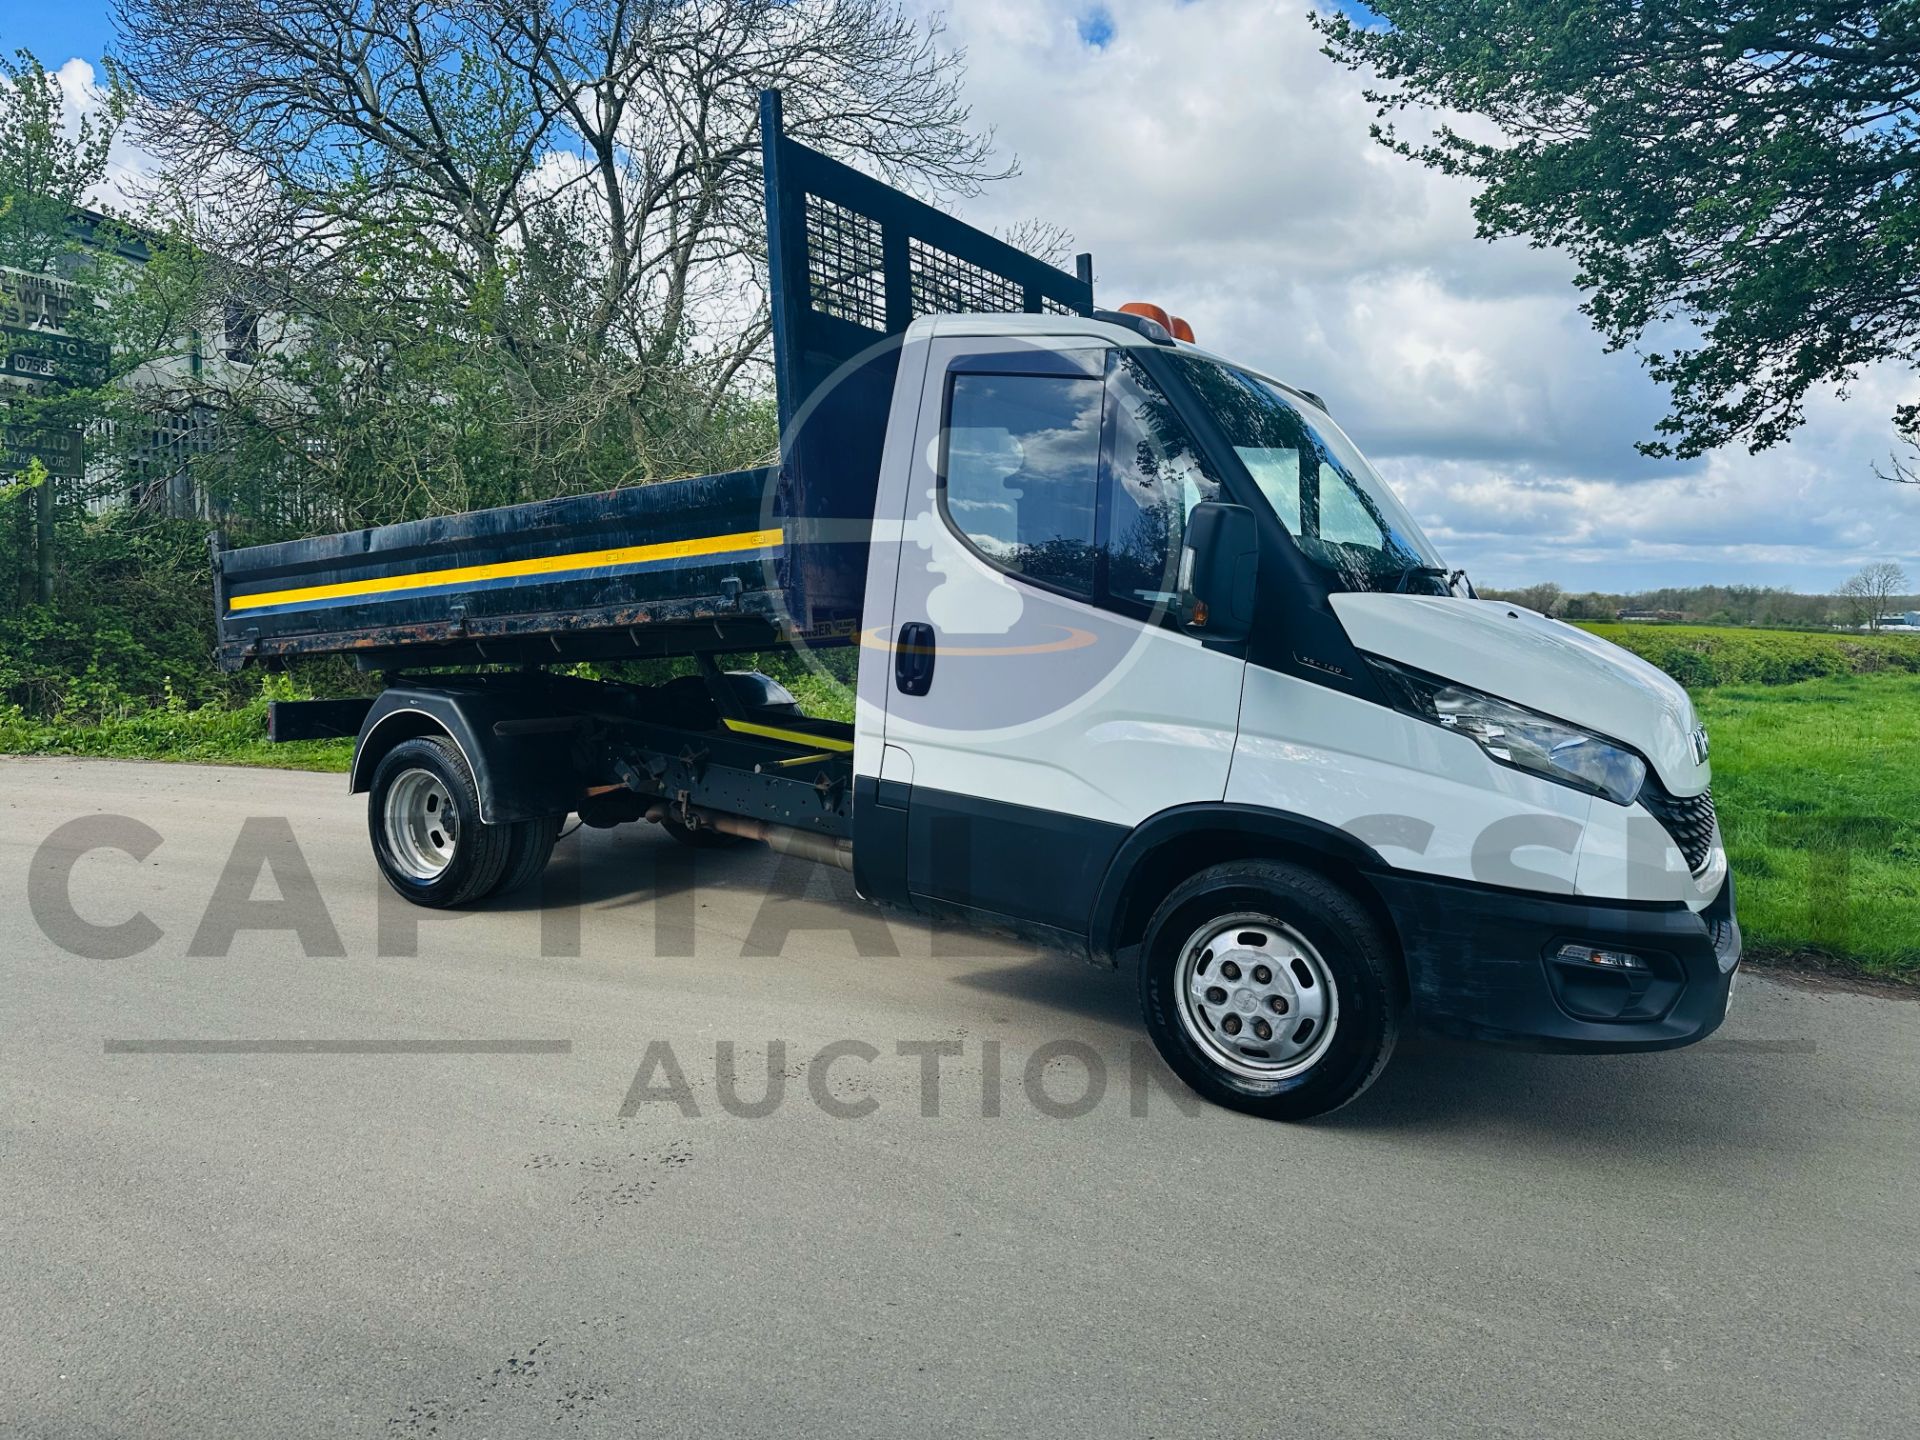 (ON SALE) IVECO DAILY 35C14 *SINGLE CAB - TIPPER TRUCK* (2020 - EURO 6) 2.3 DIESEL - (3500 KG)